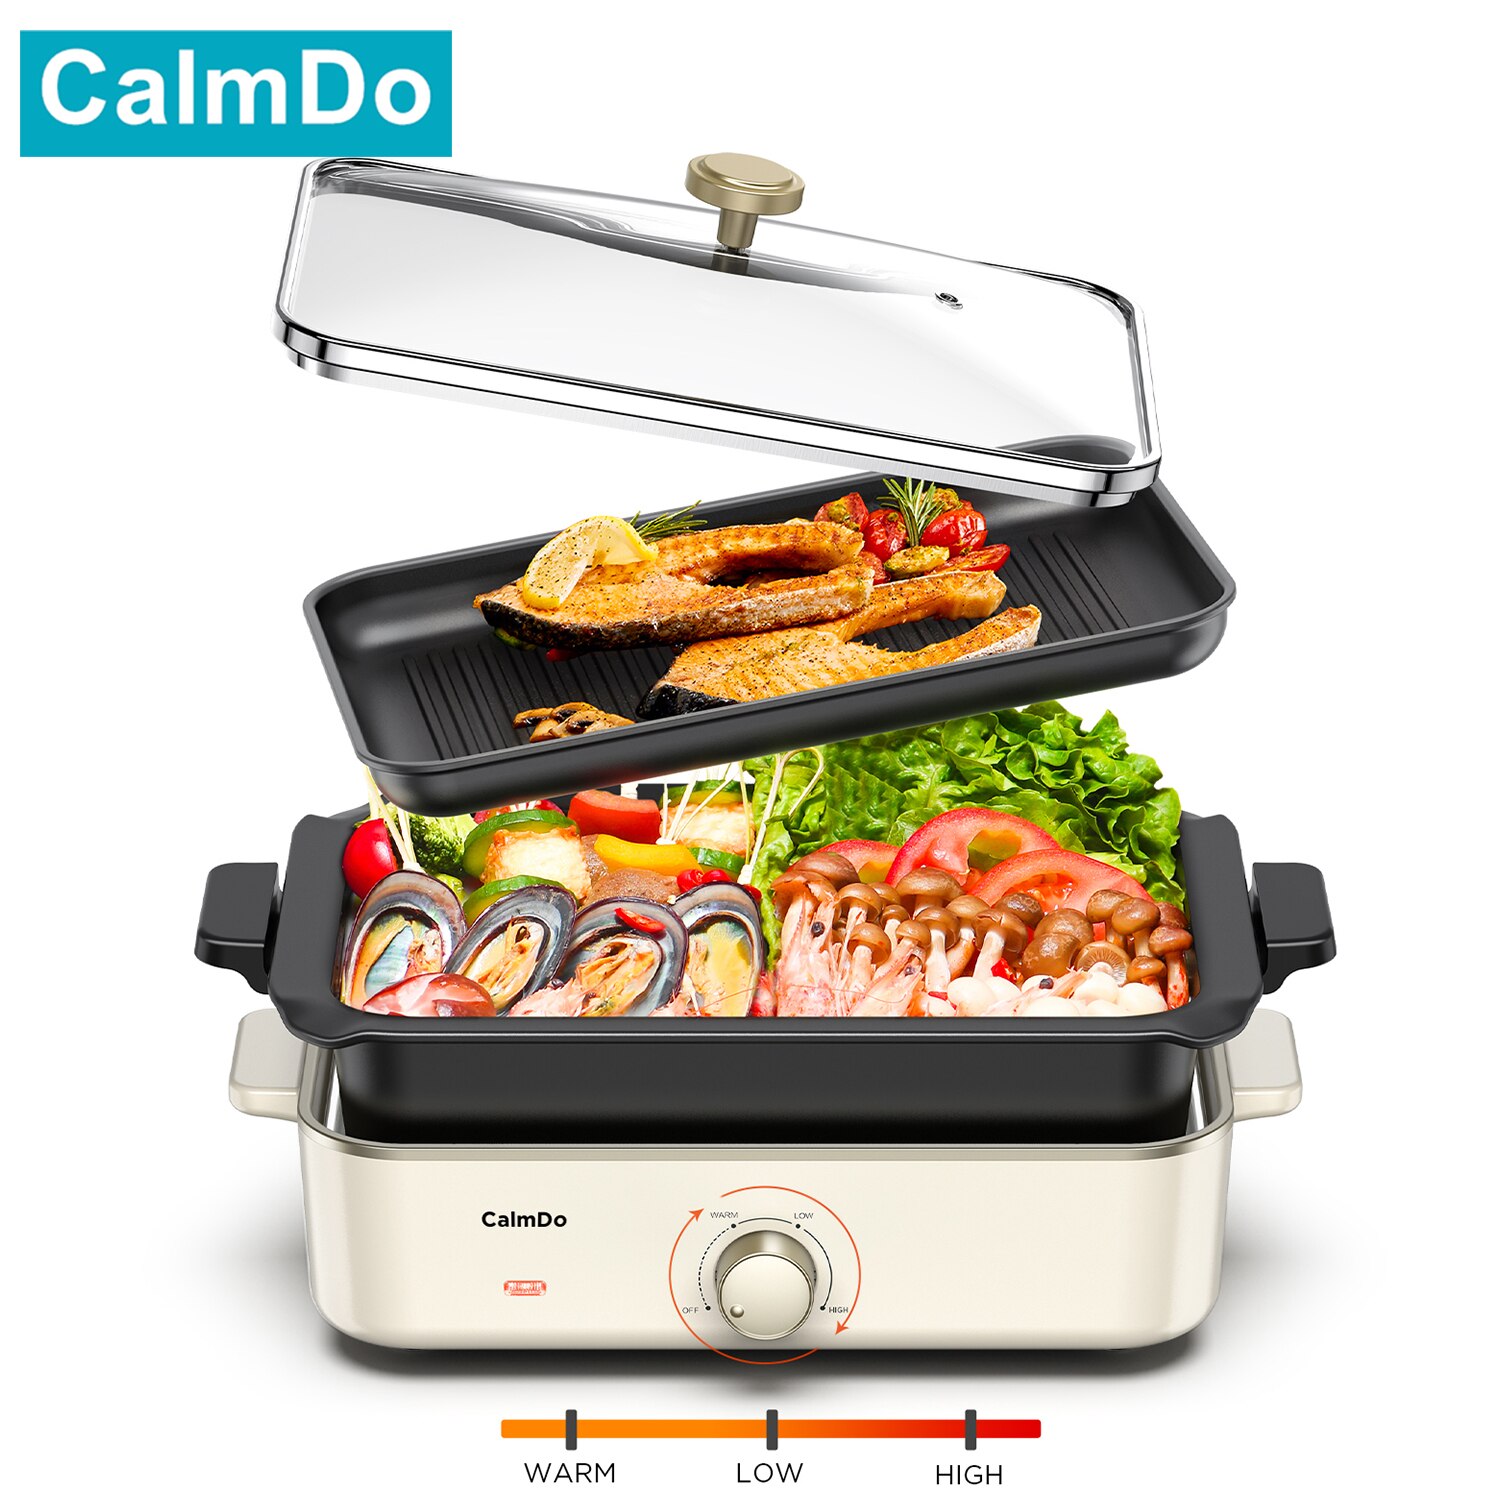 CalmDo 1400W Electric Pot-Grill and Deep Frying Pan Multifunction Pot with Grill Plate Non-Stick Coating Combo Home Cooking Pot